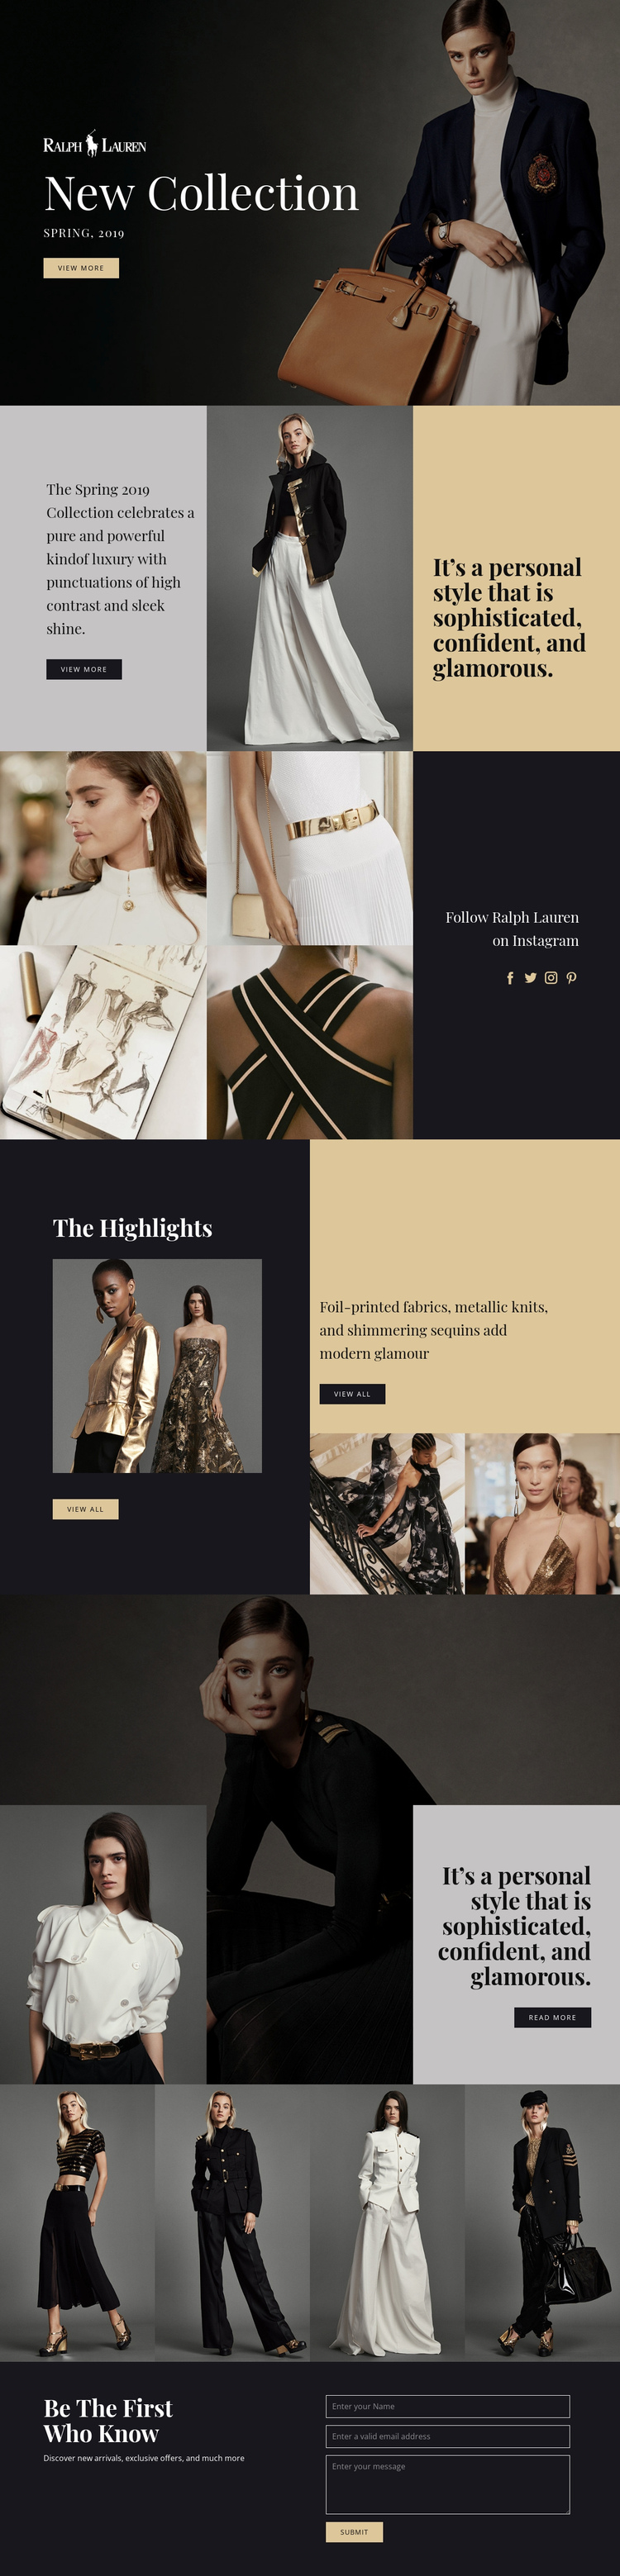 Ralph Lauren fashion One Page Template